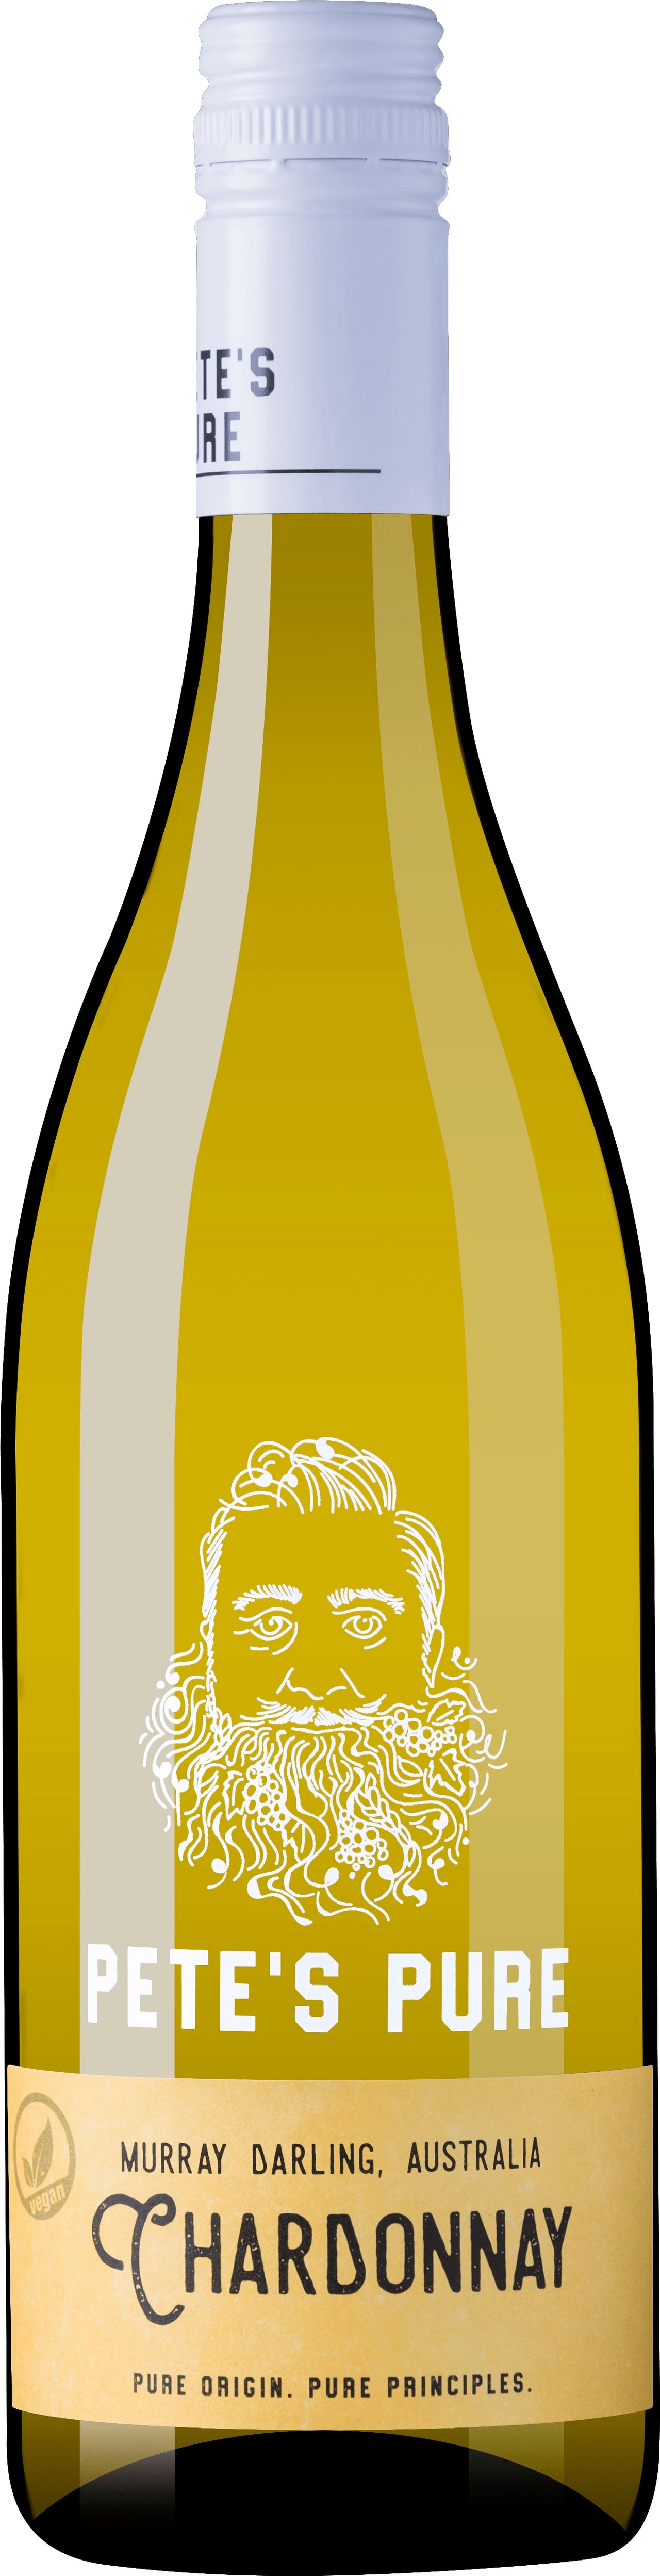 Chardonnay 21 Pete's Pure 75cl - Buy Pete's Pure Wine Wines from GREAT WINES DIRECT wine shop